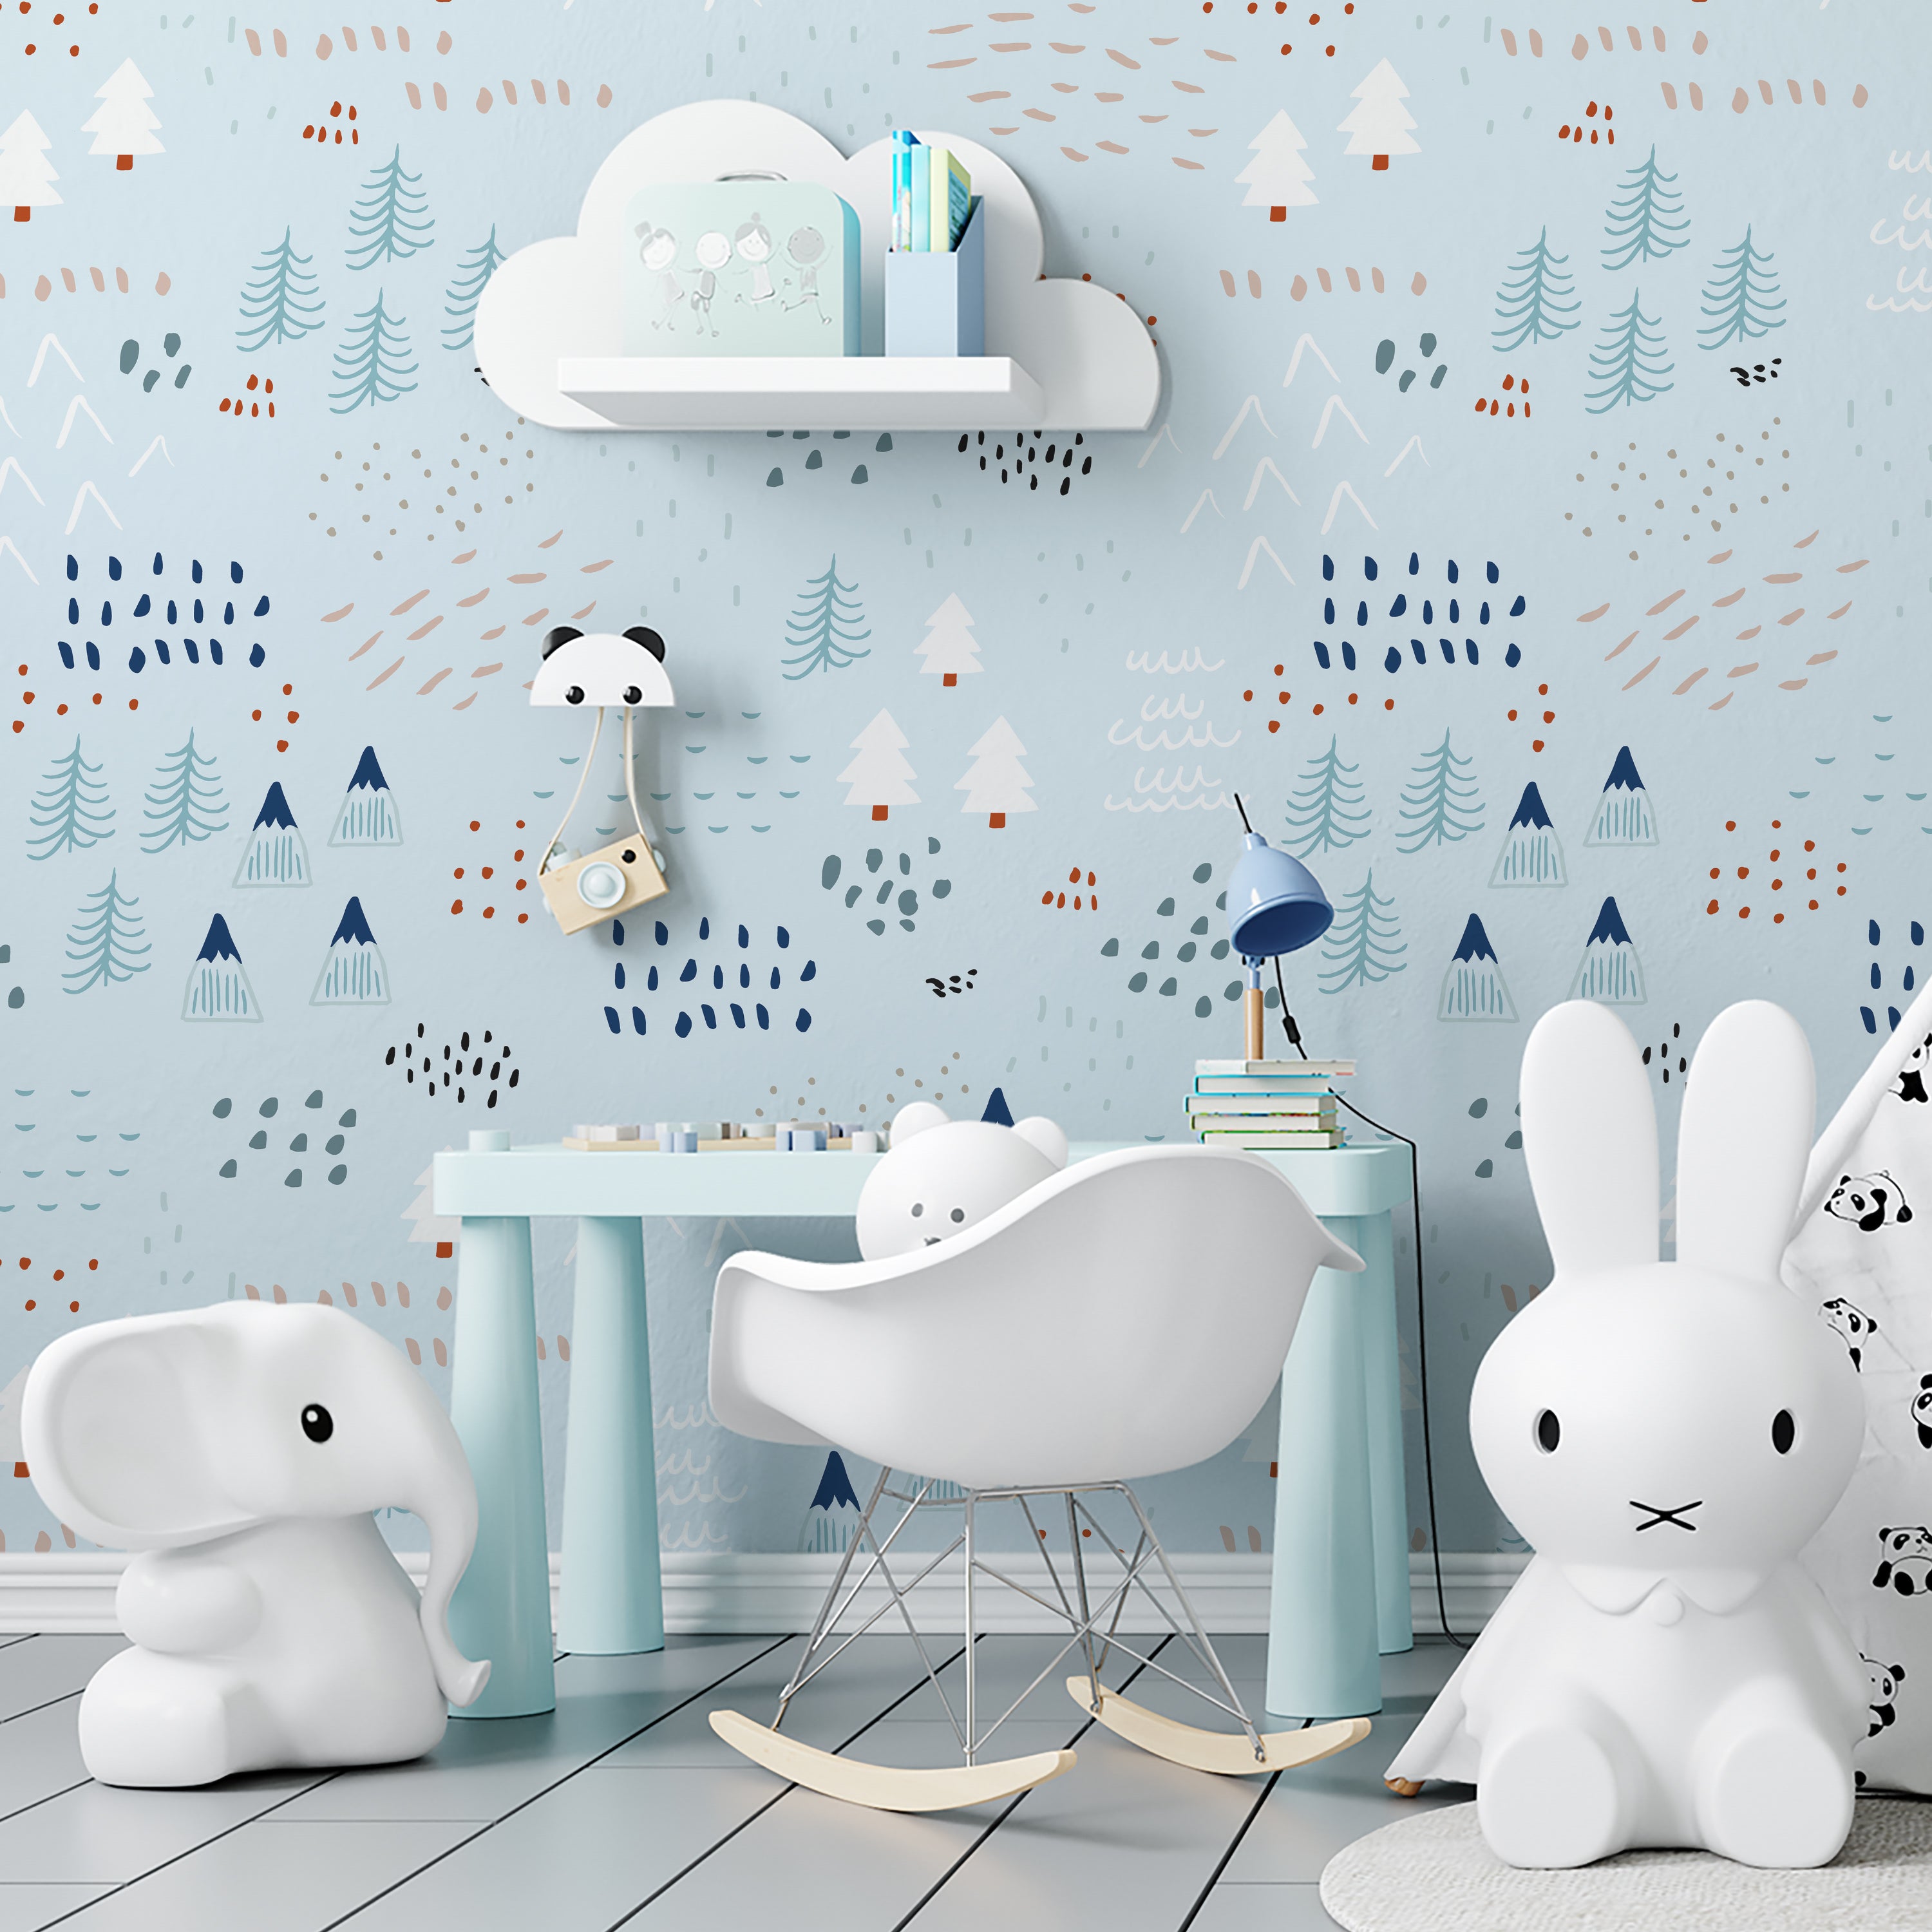 A children's playroom adorned with the "Nordic Adventure Wallpaper," which provides a backdrop of abstract trees and mountains in shades of blue, white, and orange. The room is equipped with modern children's furniture including a white elephant rocker, a cloud-shaped shelf, and playful decorations that complement the adventurous theme of the wallpaper.